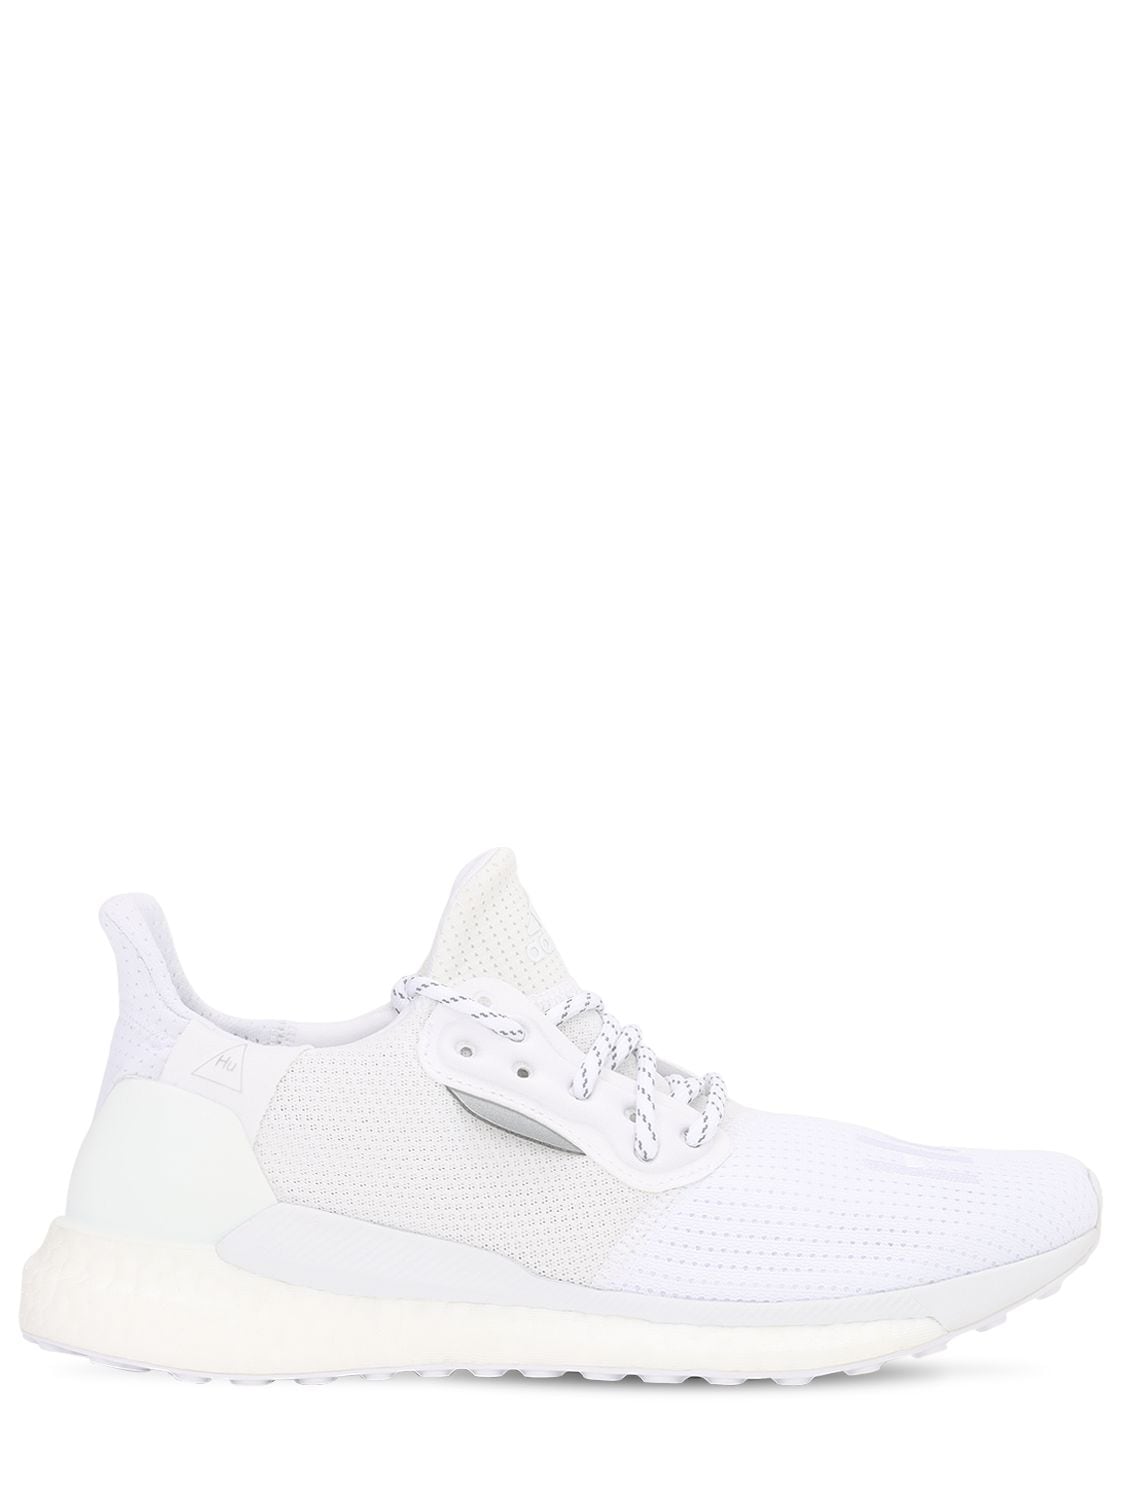 Adidas Originals By Pharrell Williams Solar Hu Boost Trainers In White